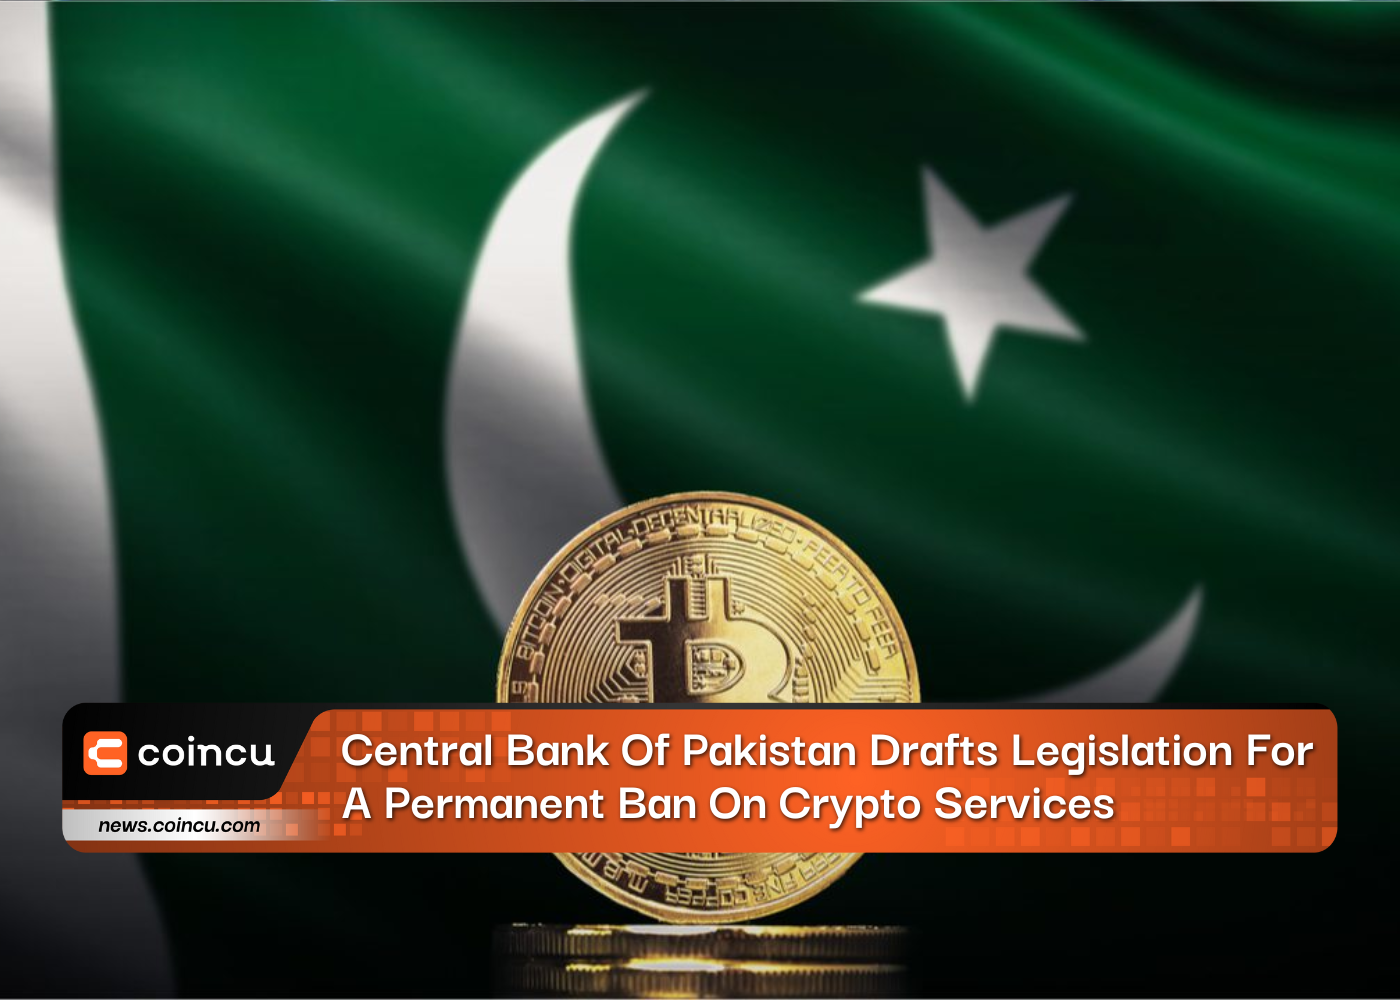 Central Bank Of Pakistan Drafts Legislation For A Permanent Ban On Crypto Services